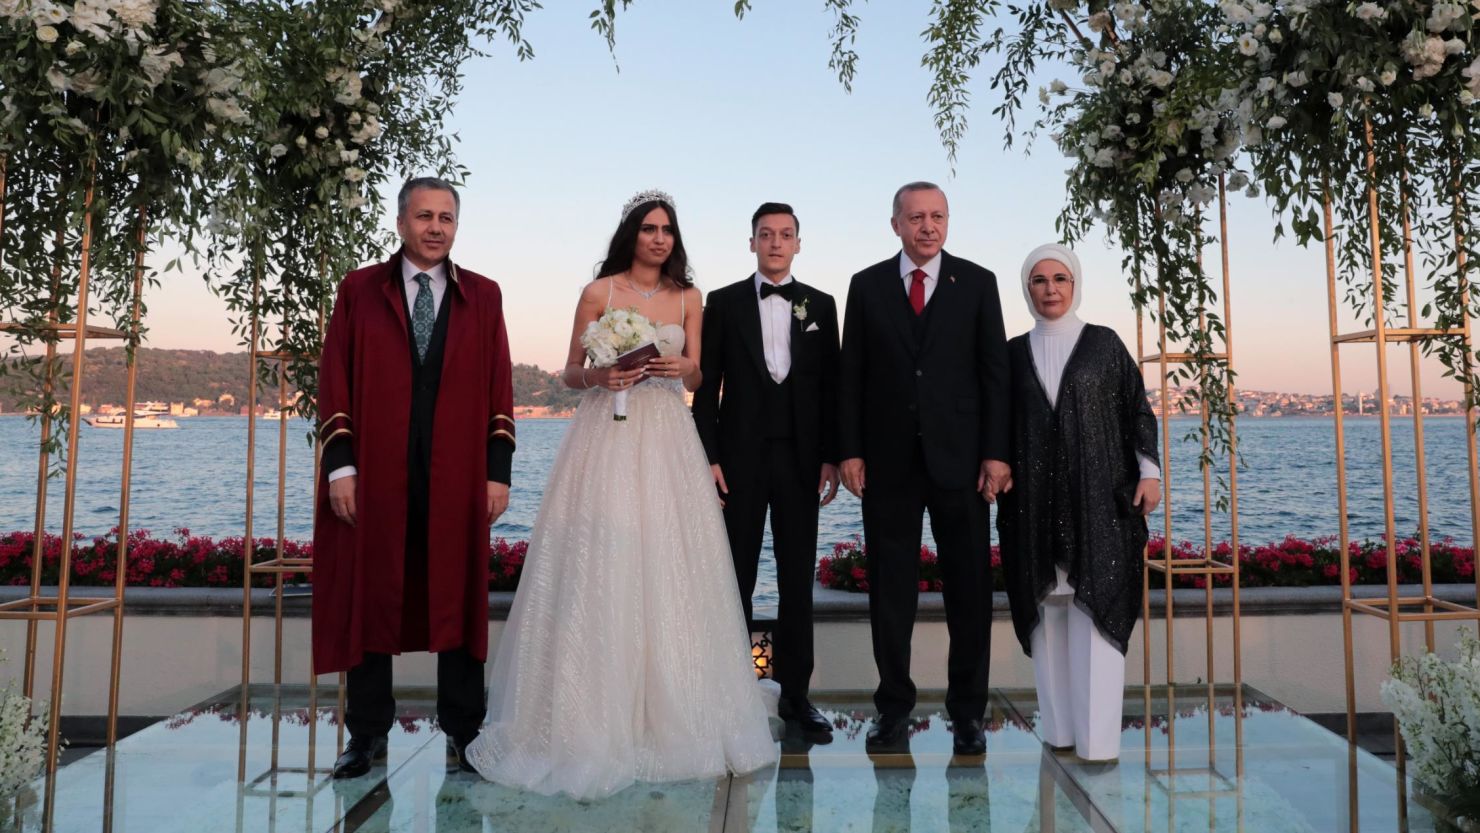 Turkish President Recep Tayyip Erdogan, second from right, and his wife Emine Erdogan attend the wedding ceremony Friday of footballer Mesut Ozil and Amine Gulse, along with the governor of Istanbul Ali Yerlikaya, far left. 